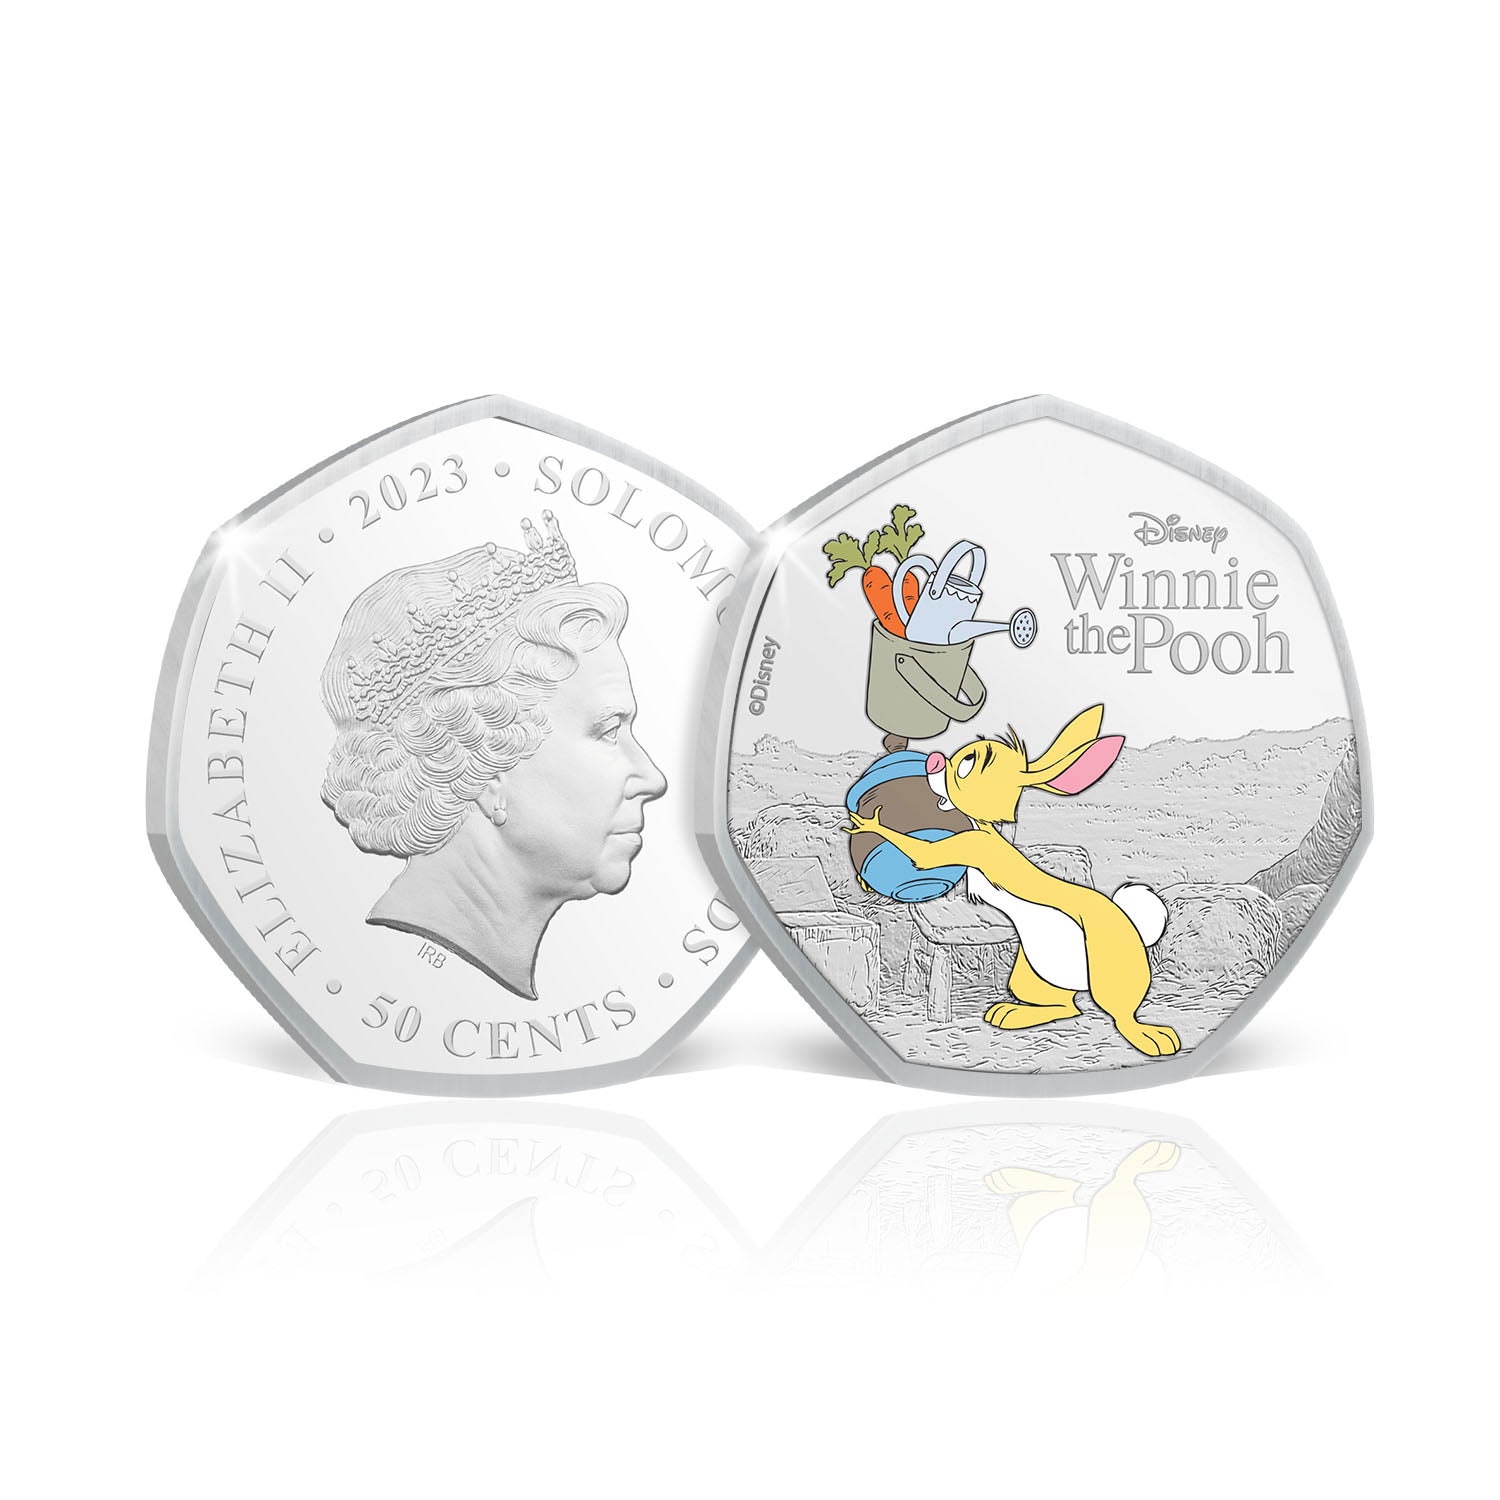 The Winnie the Pooh 2023 Rabbit Coin